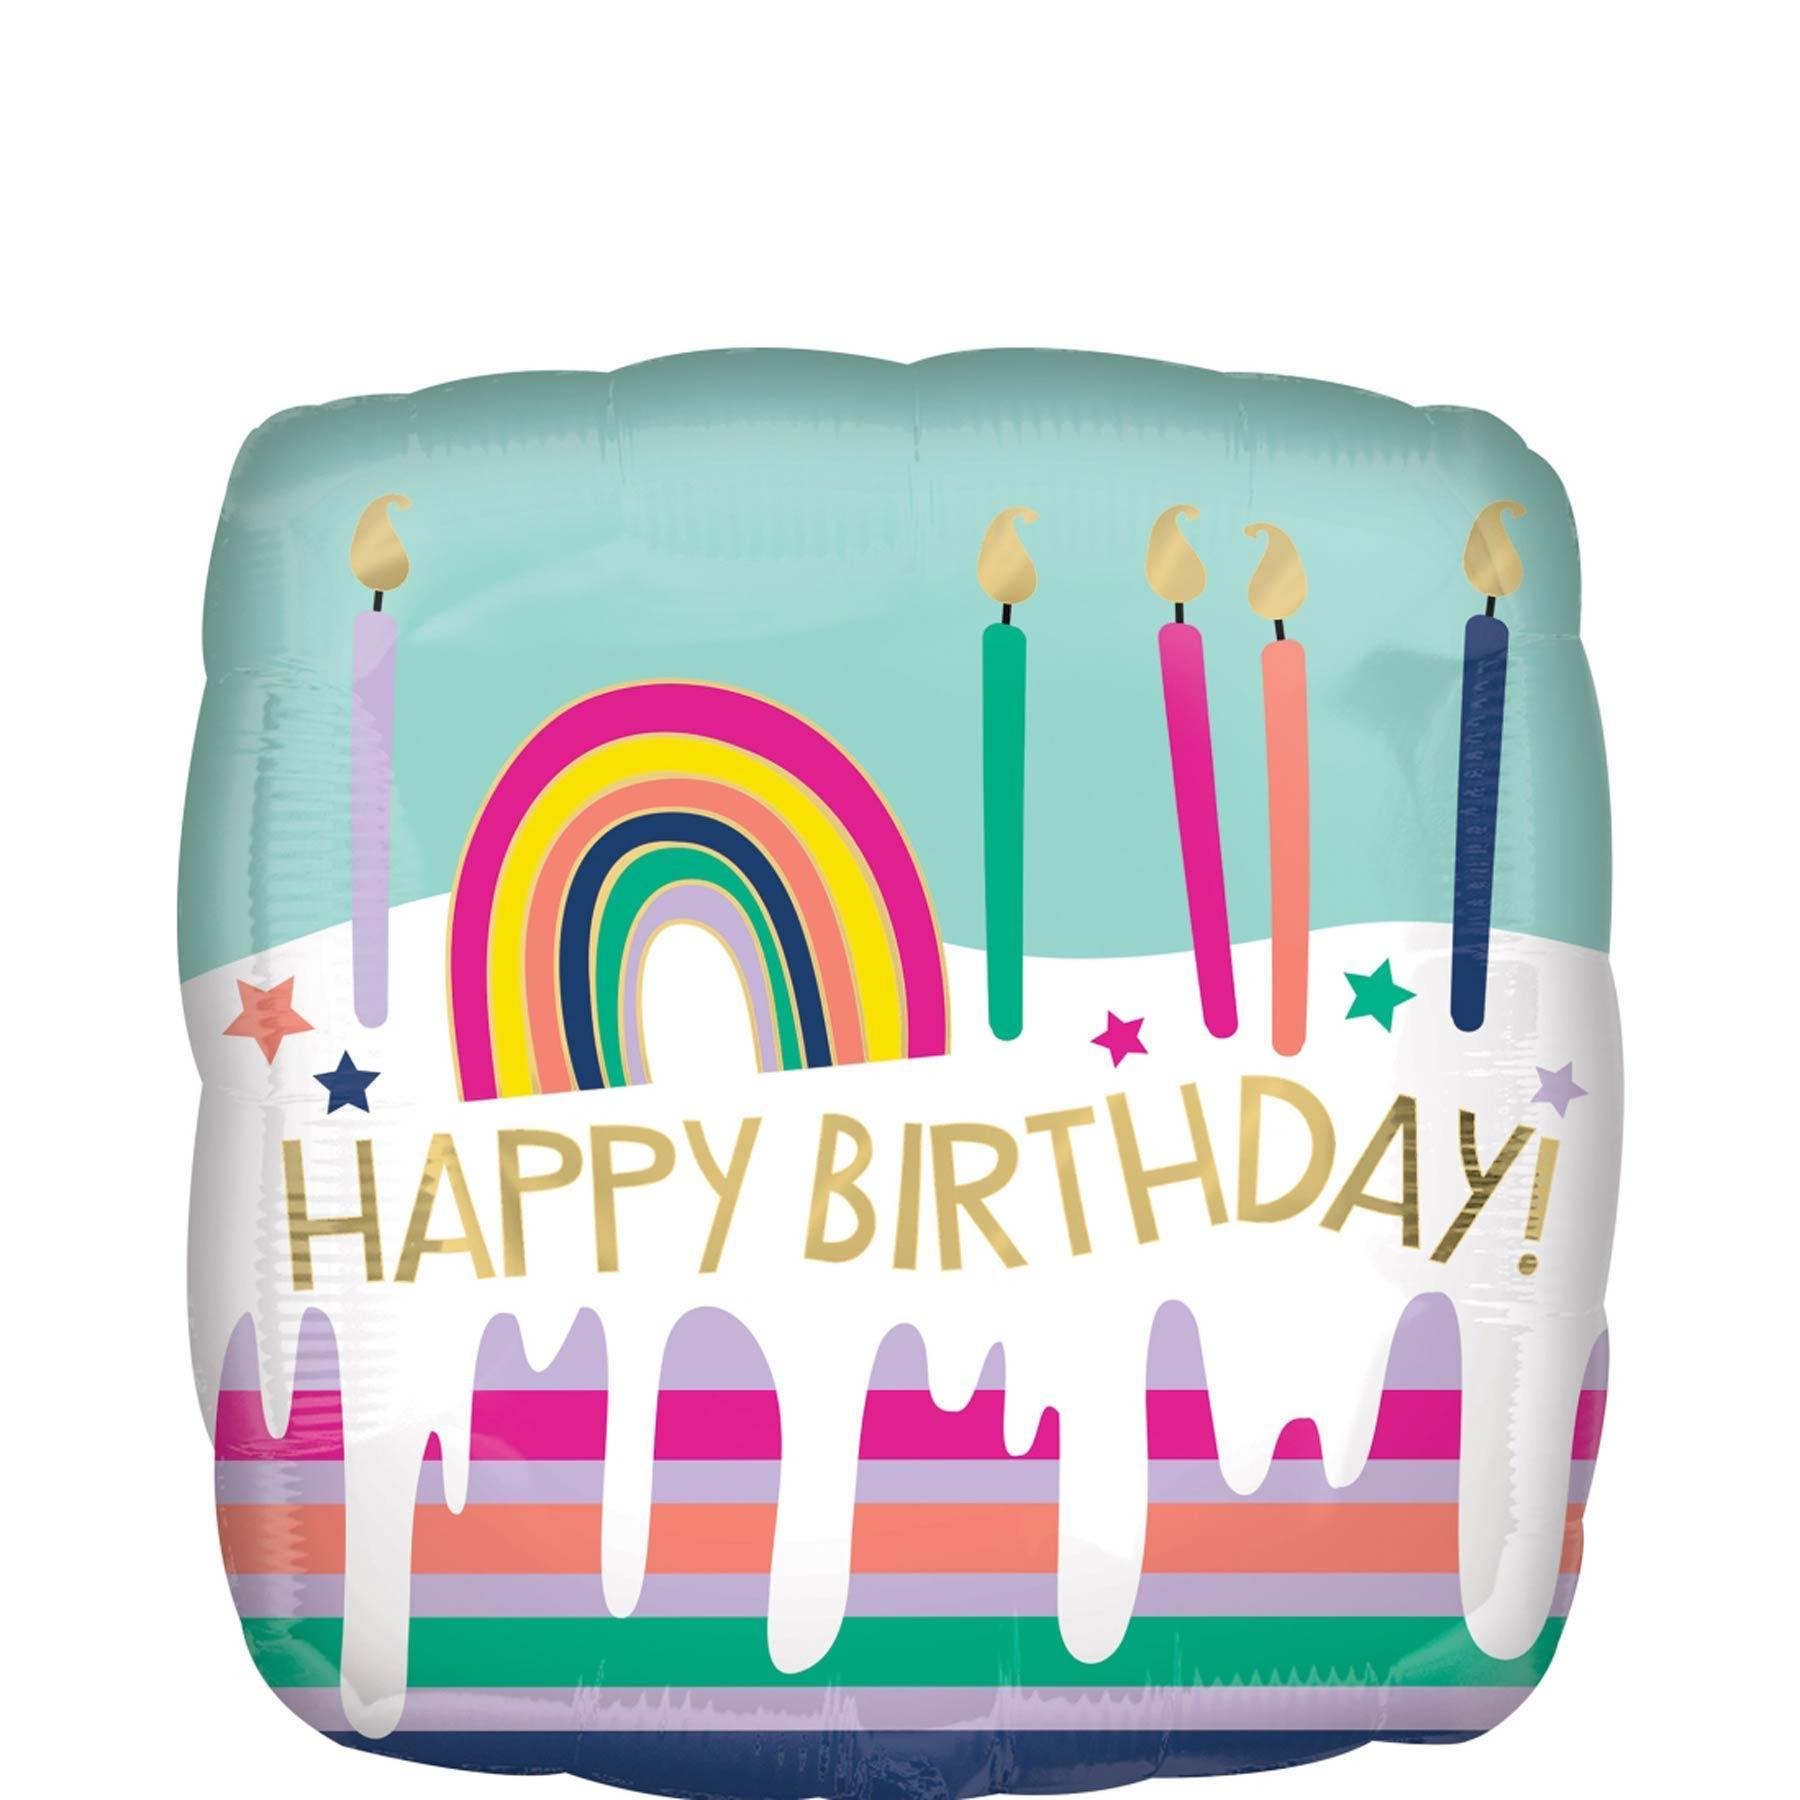 Happy Birthday Frosted Striped Cake Balloon 45cm Balloons & Streamers - Party Centre - Party Centre